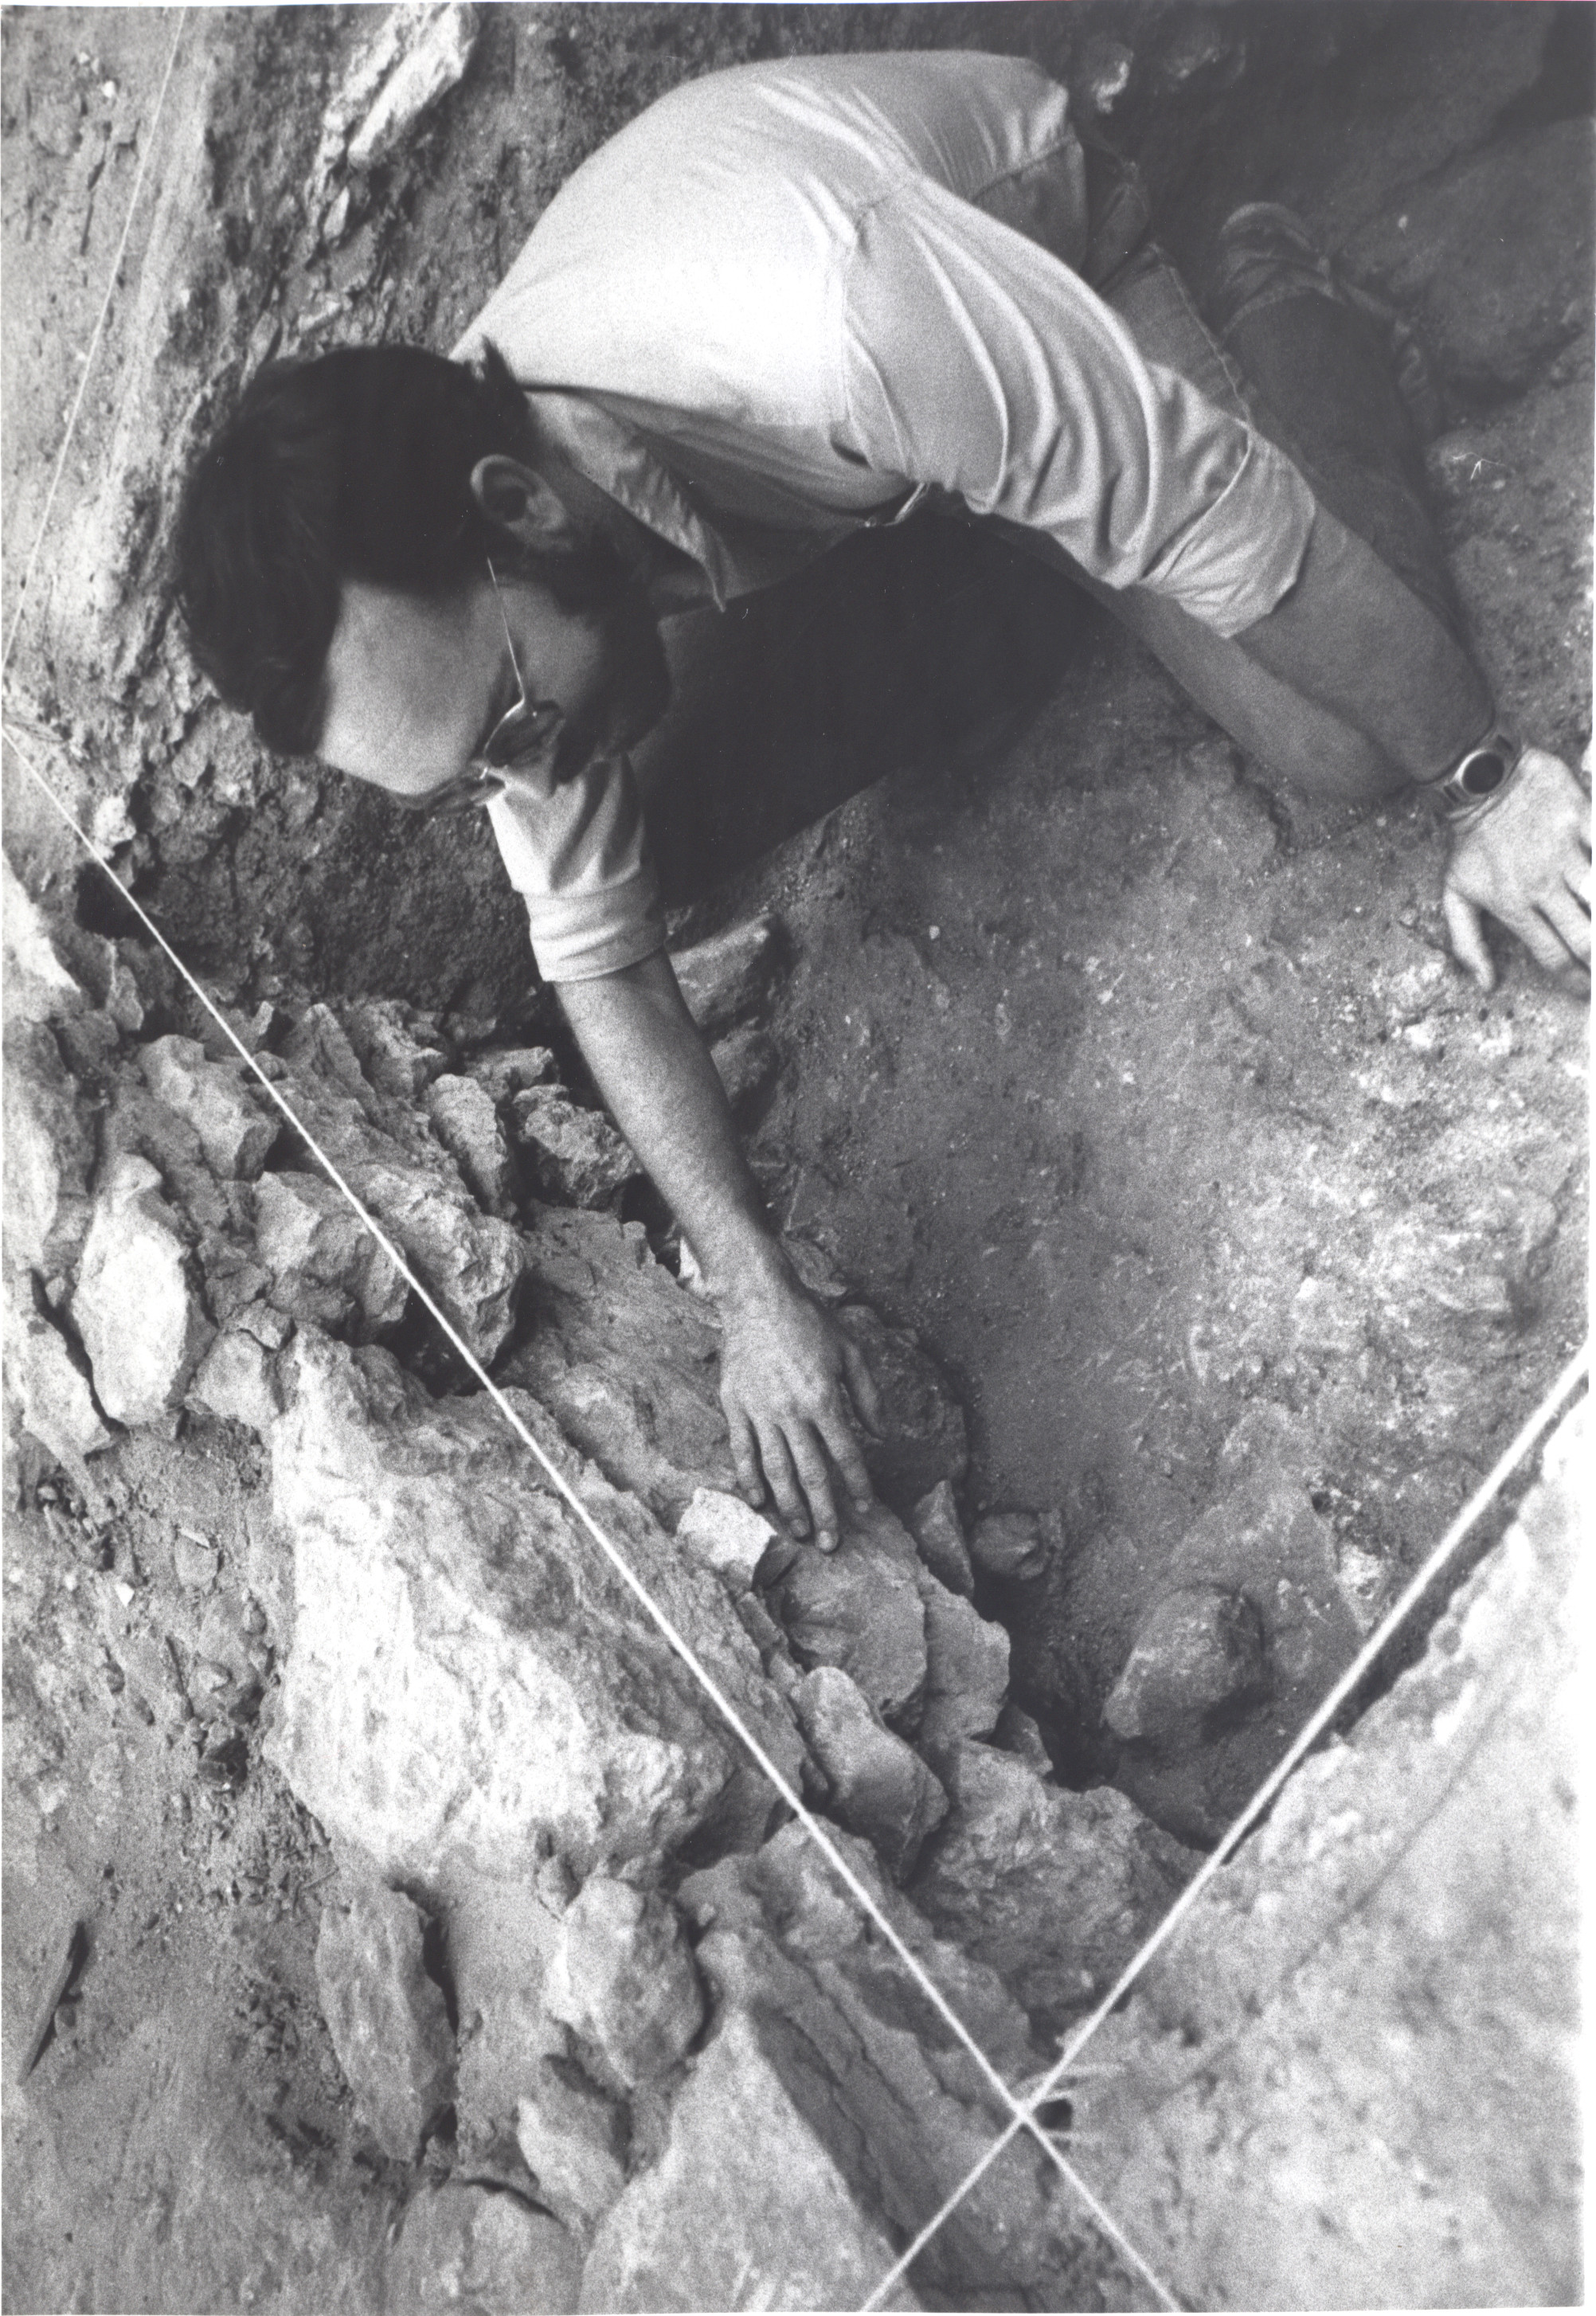 Jake Ivey at the Radio Shack Excavation in 1979